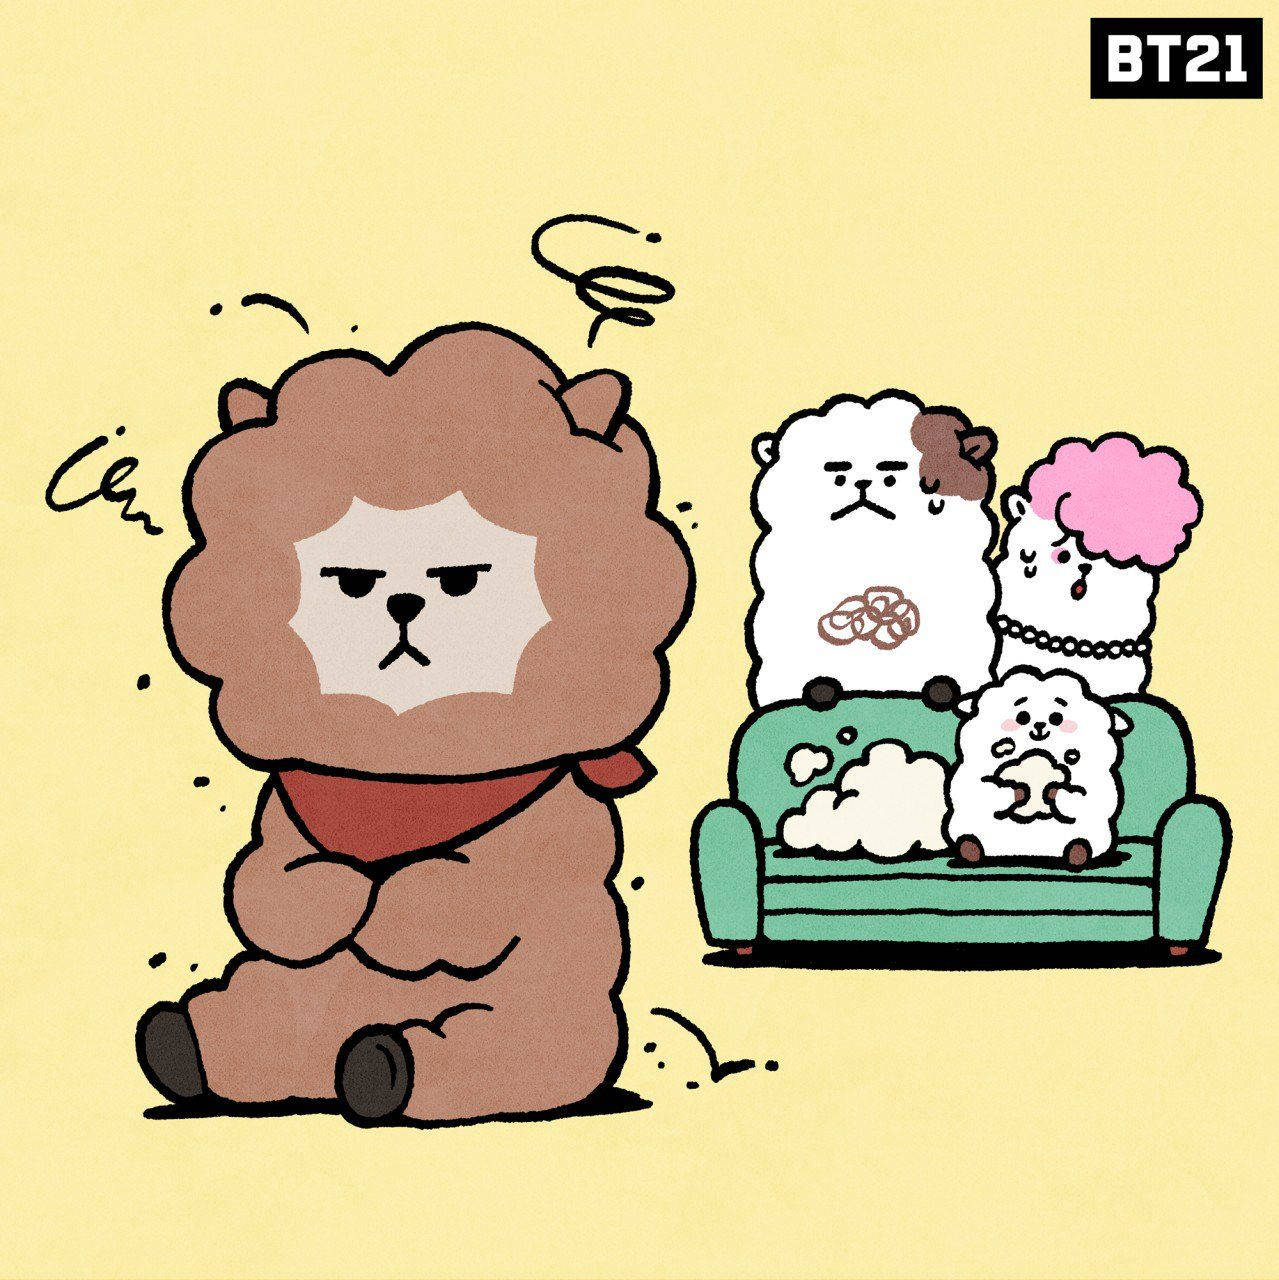 Brown Rj Bt21 With His Family Background